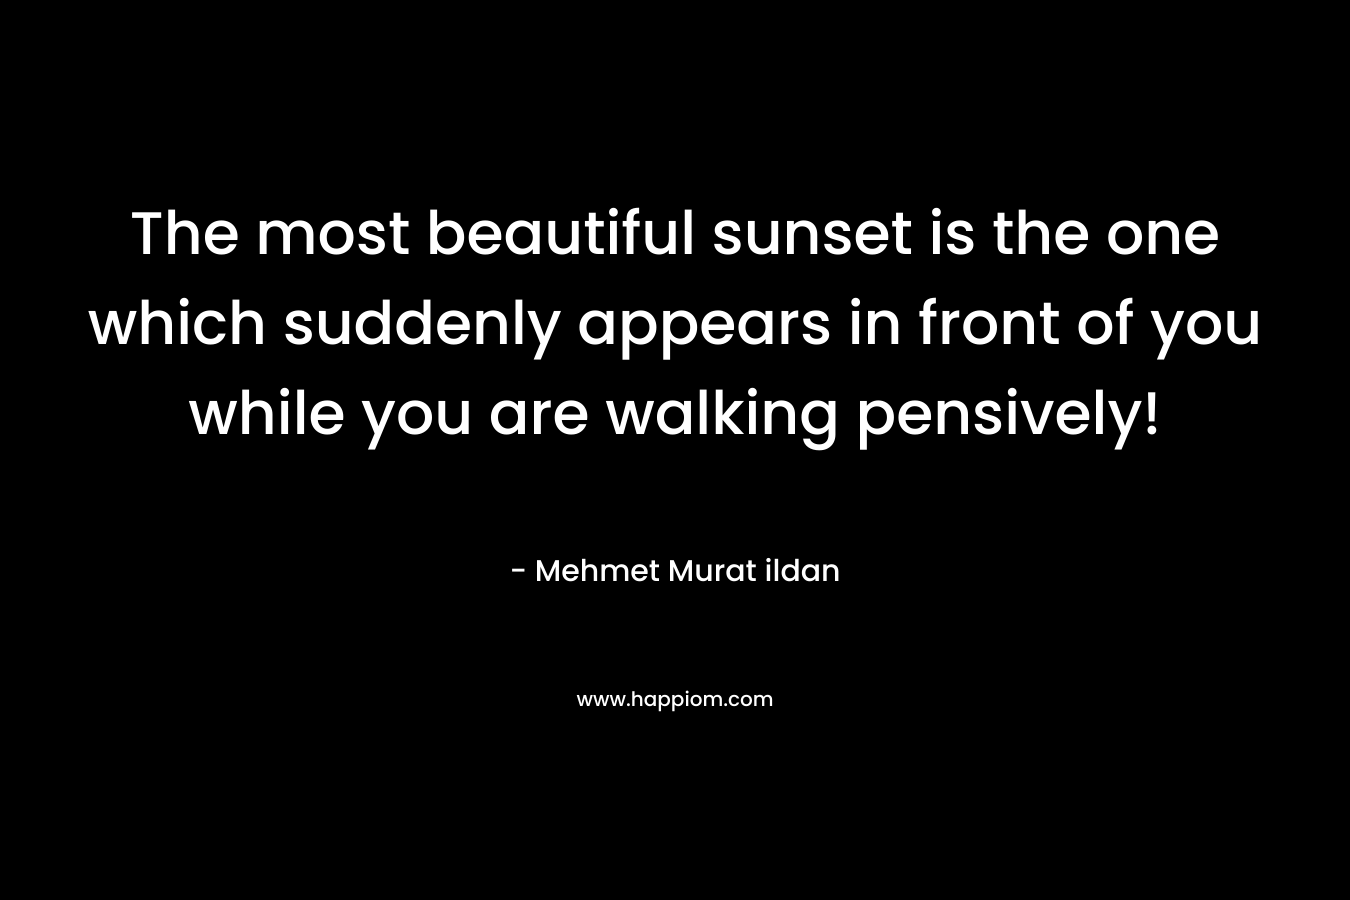 The most beautiful sunset is the one which suddenly appears in front of you while you are walking pensively! – Mehmet Murat ildan